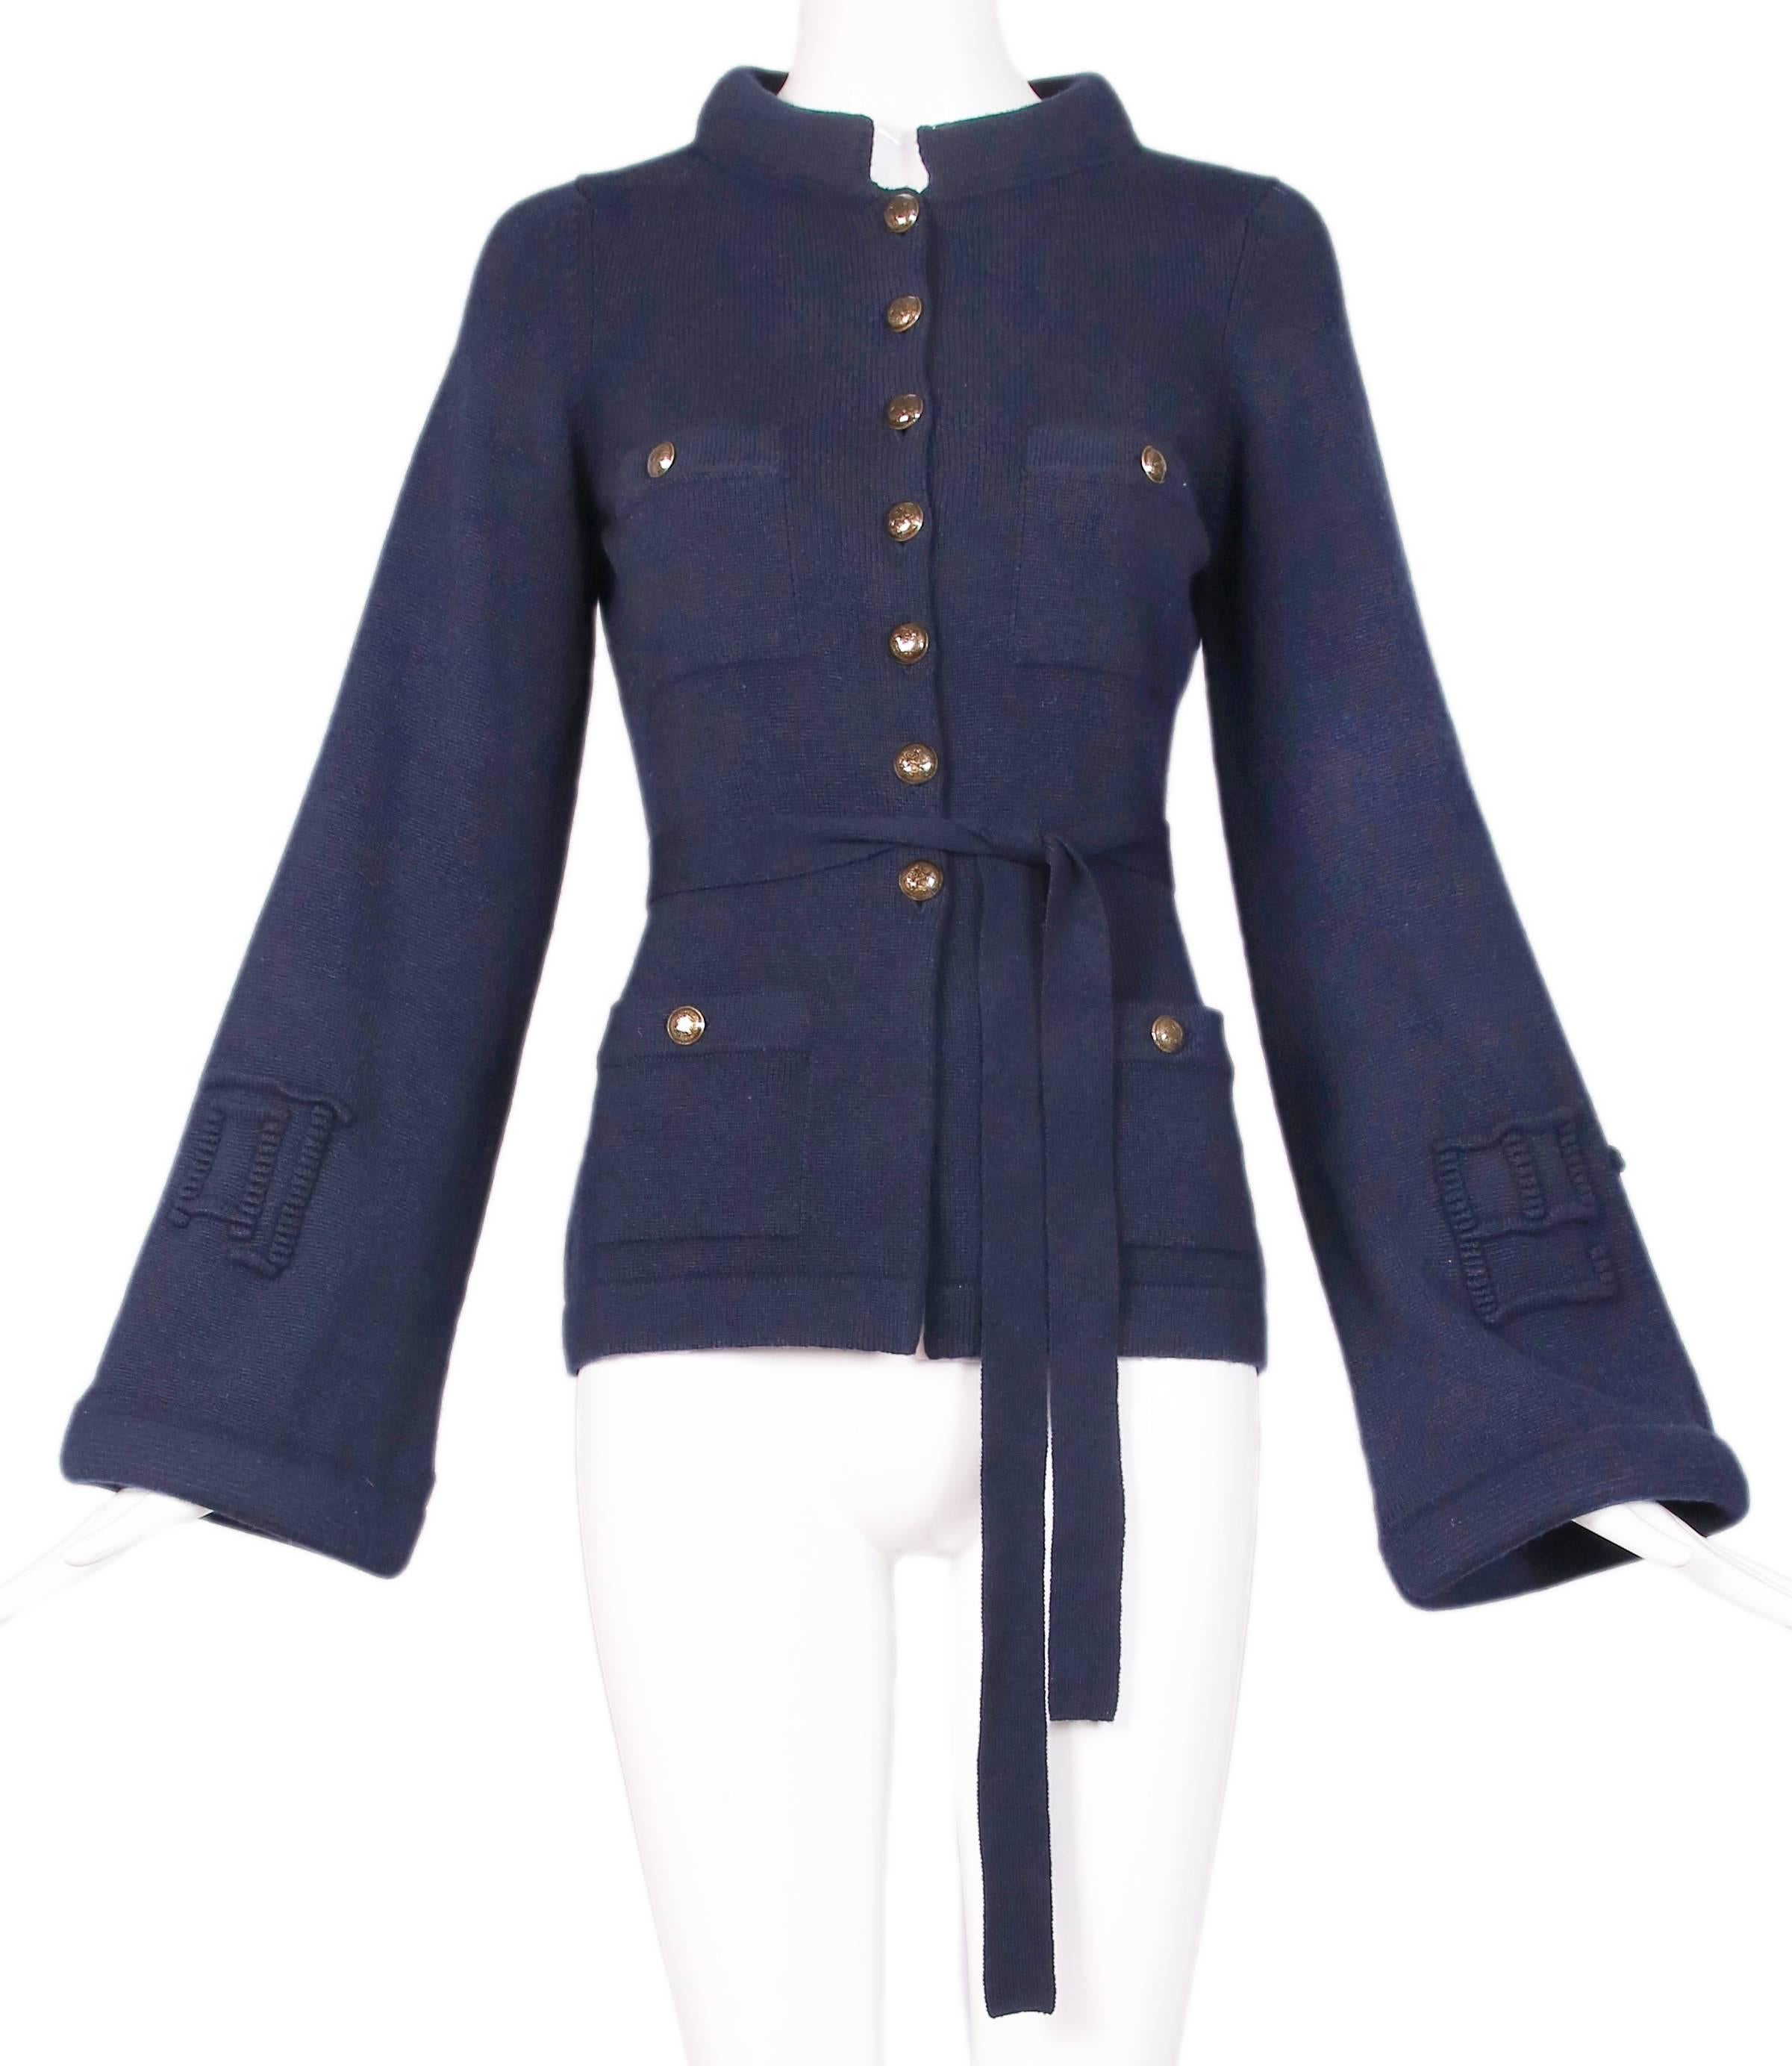 2010 Chanel "Metiers D'Art" collection navy cashmere blend cardigan sweater with waist tie, frontal pockets, glazed metallic logo buttons and rolled Nehru collar. Sweater features bell sleeves embellished with raised Chinese